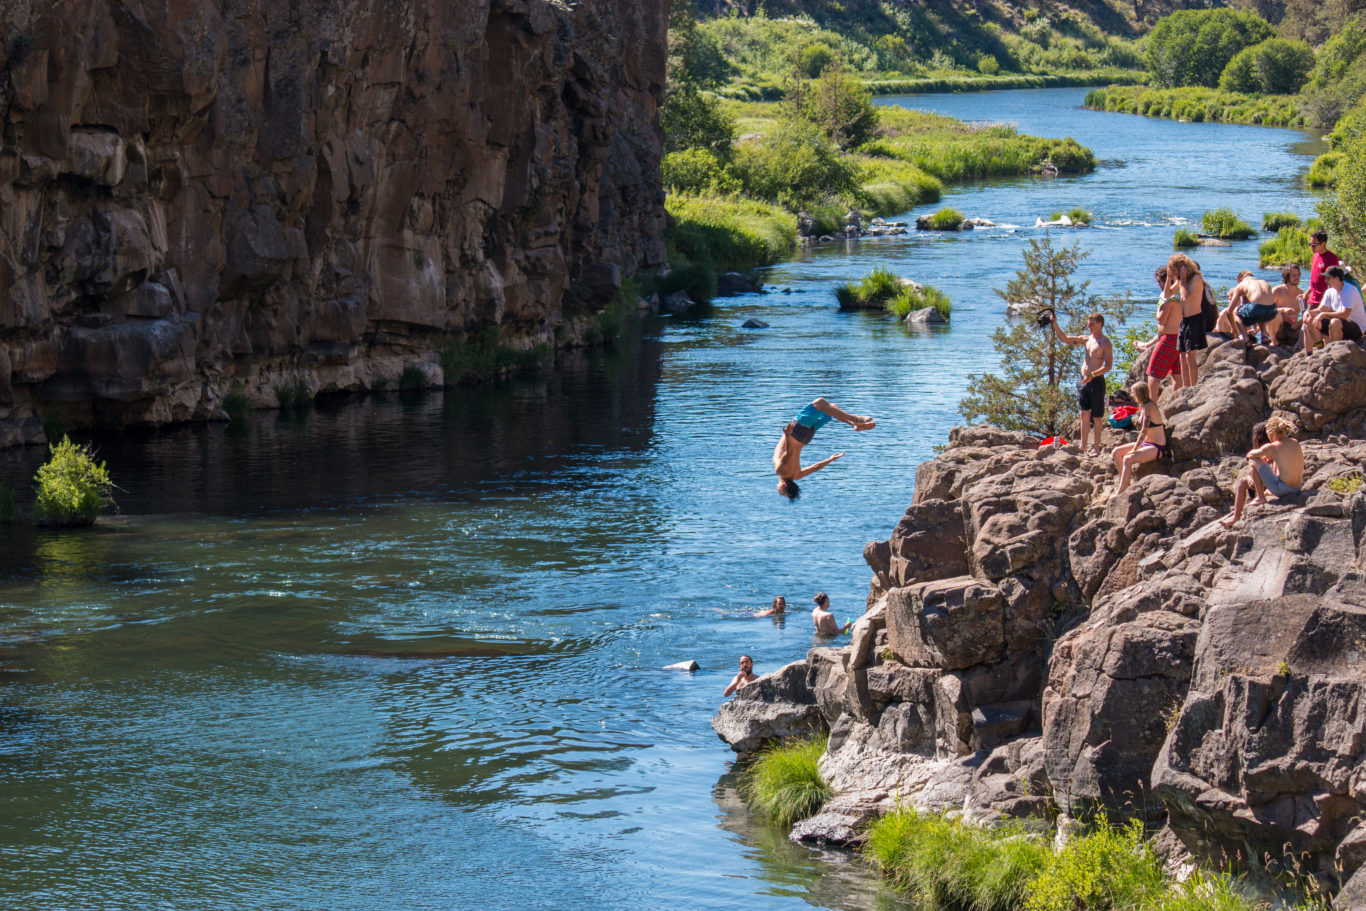 Victor Arias backflips into the river in Oregon - Photograph by Erick Garcia